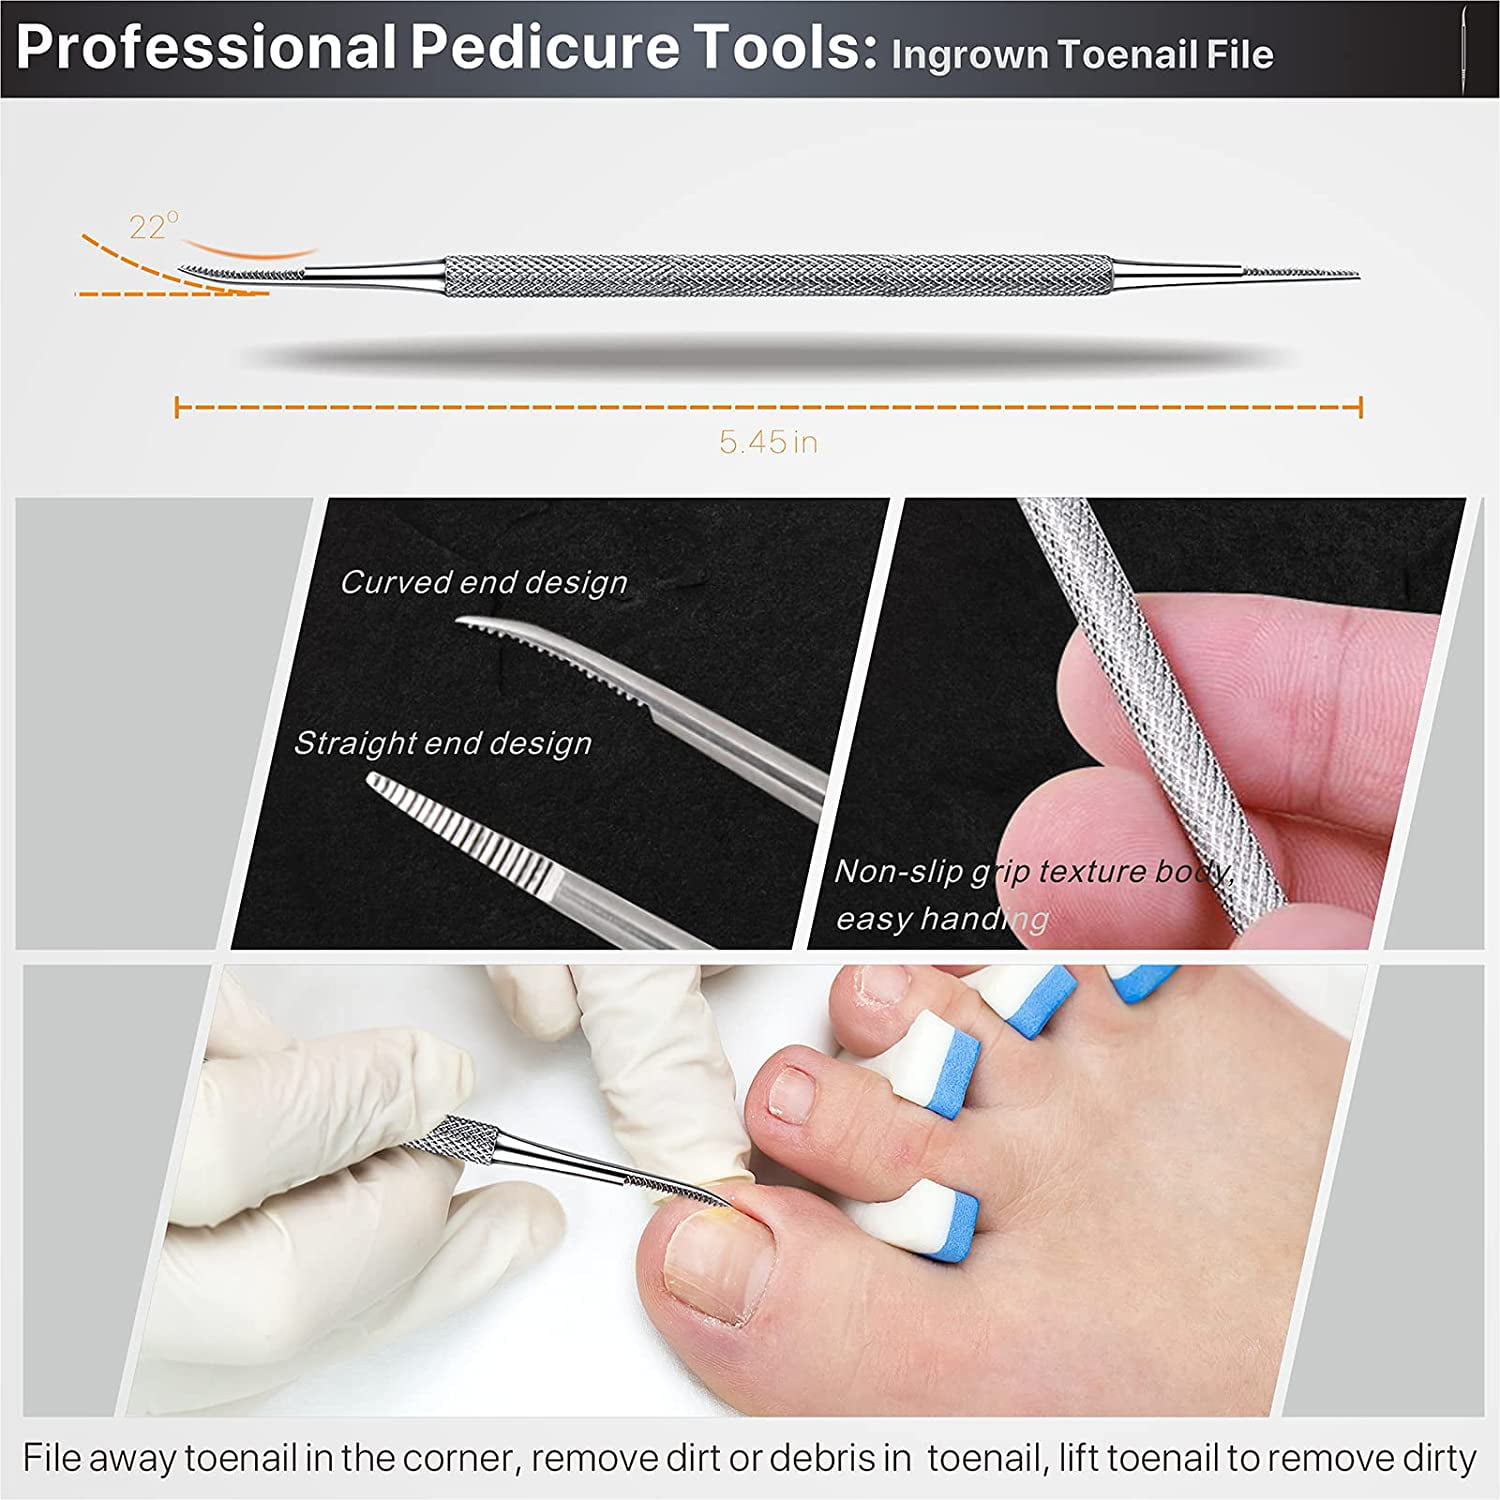  Toe Nail Clippers, Long Handle Toenail Scissors for Thick  Ingrown Toenails, Toenail File for Seniors Disables Thick & Ingrown,  Stainless Steel Toenail Cutters, Pedicure Nail Tool Set : Beauty & Personal